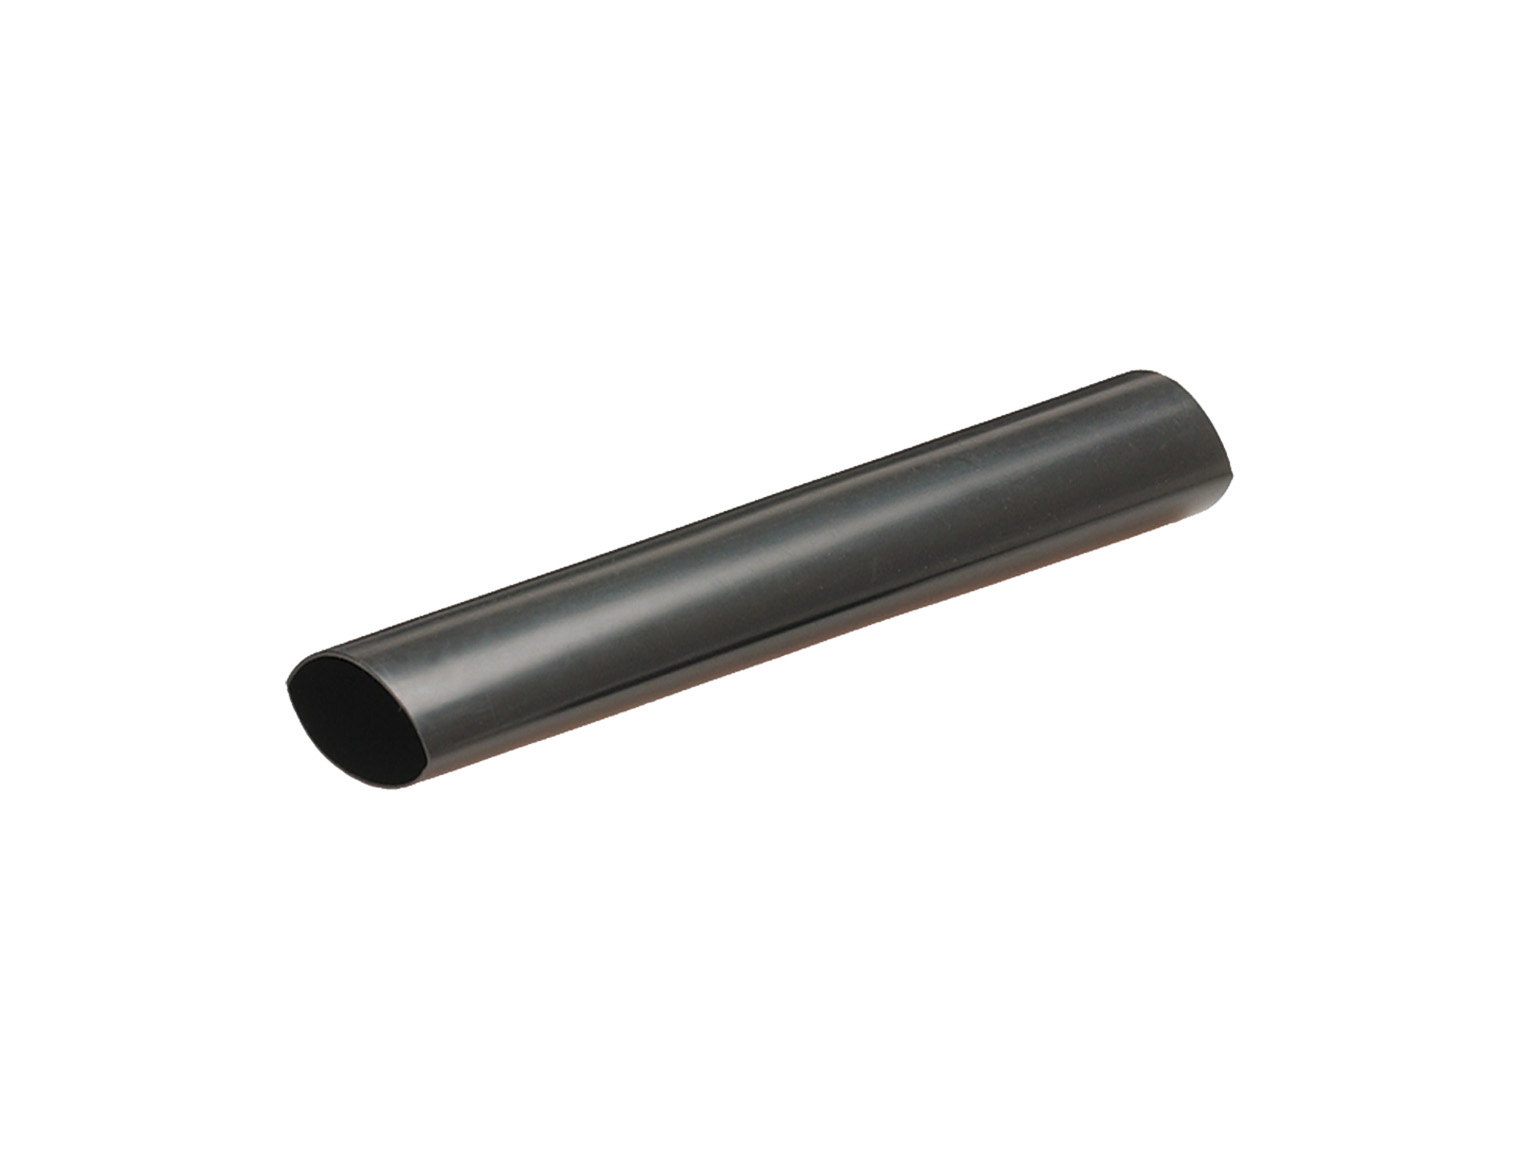 NSVM-S single core low voltage heat-shrinkable straight joint